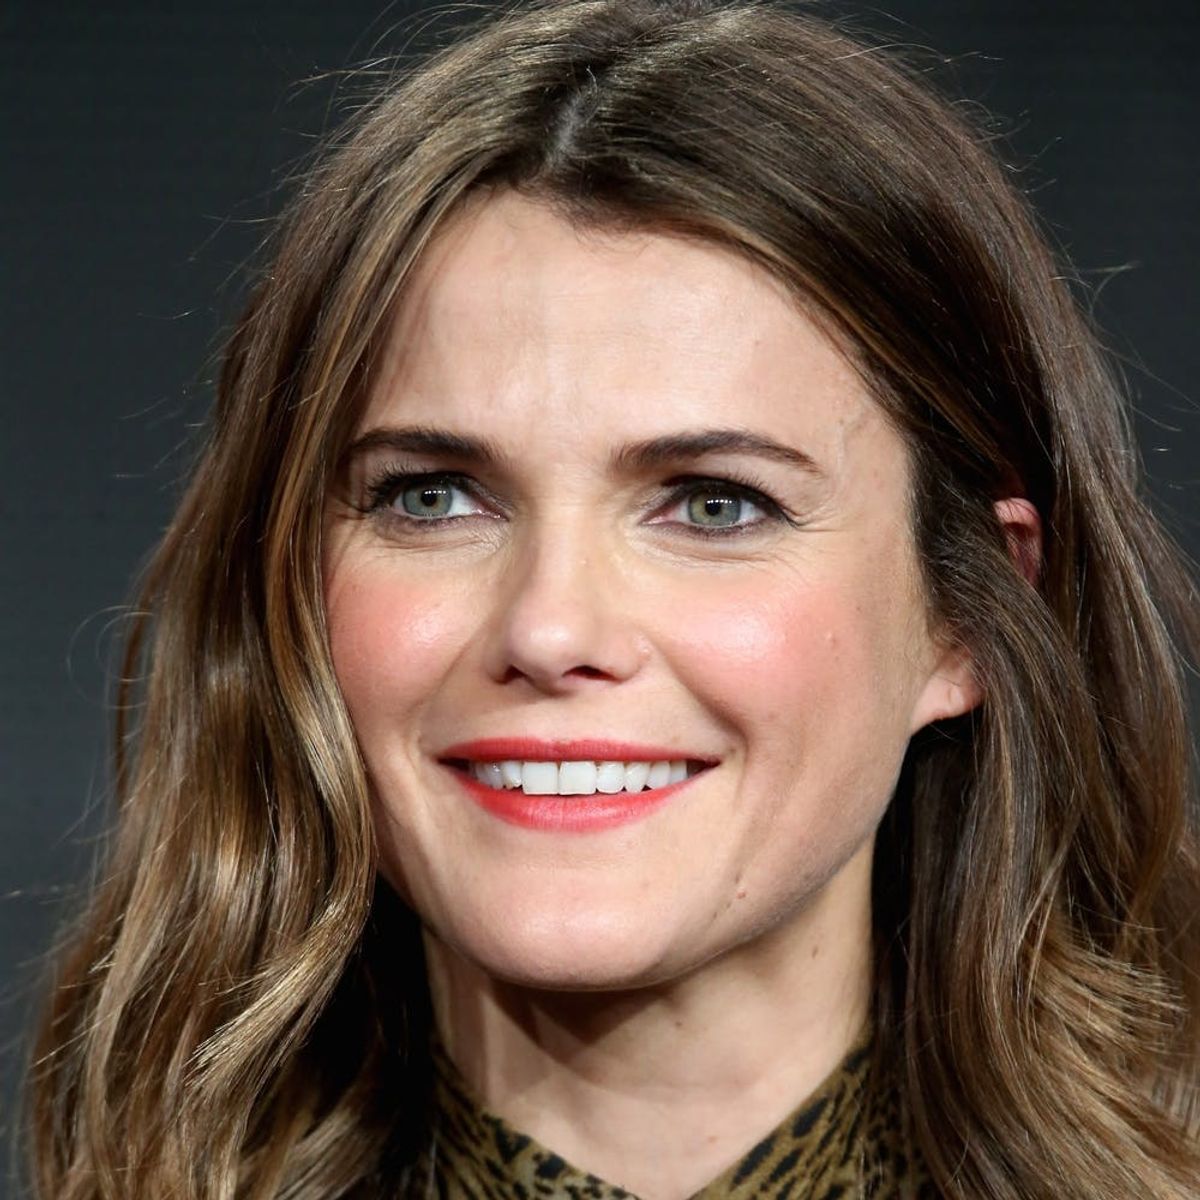 Keri Russell Just Showed Off the Most Elegant Baby Bump Style Ever